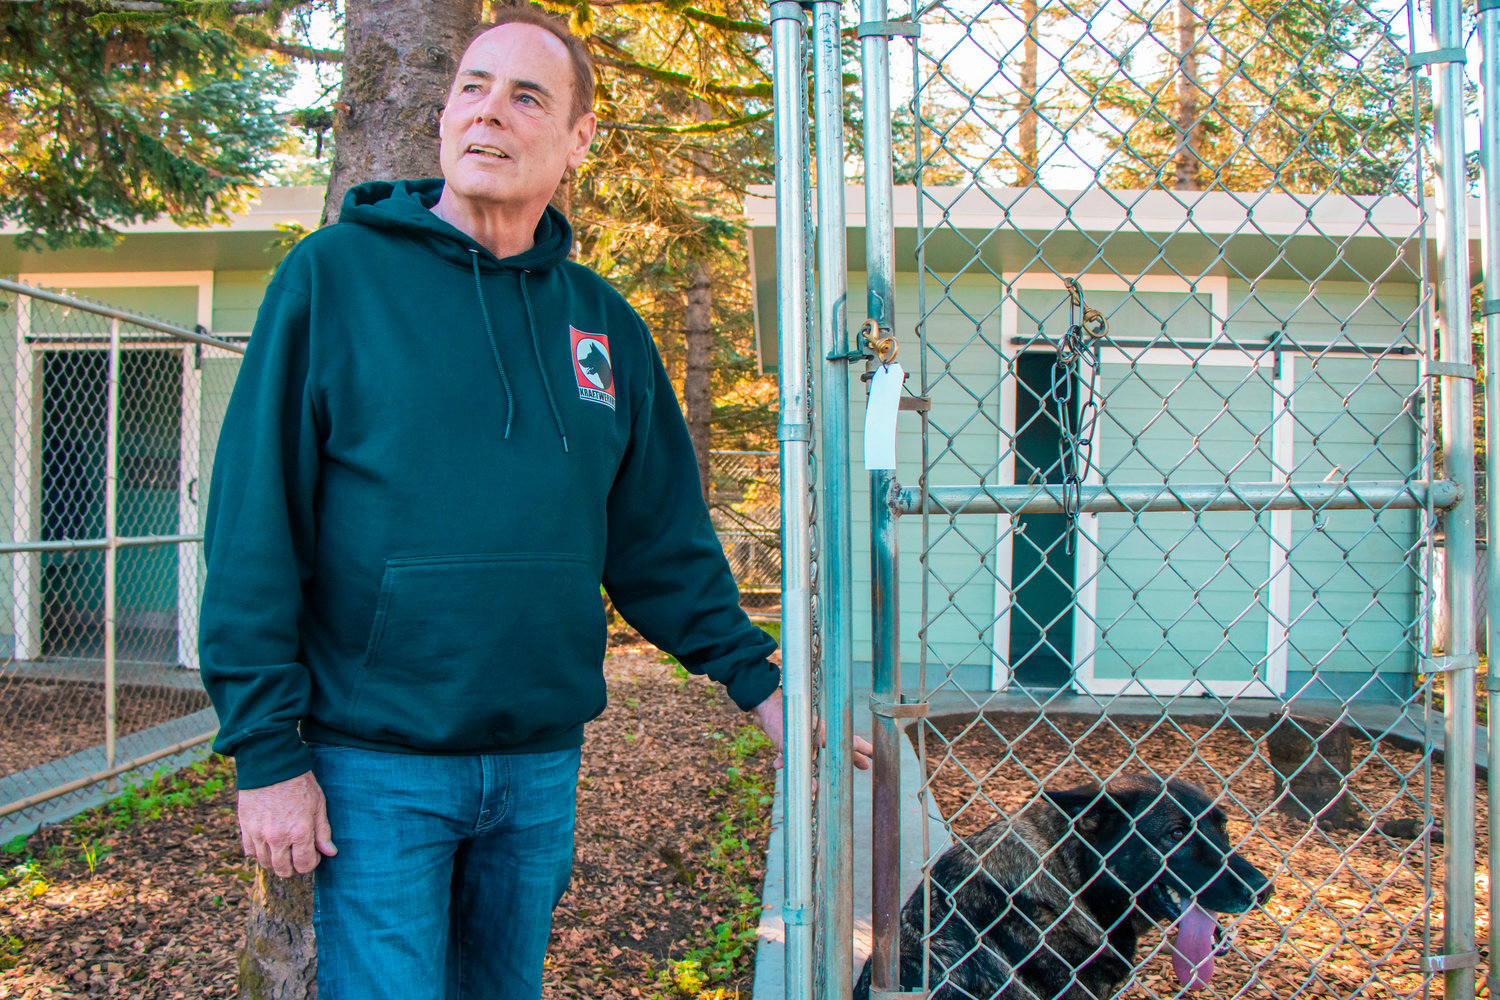 Wayne Curry talks about the uniquely designed kennels and living conditions Tuesday afternoon at Kraftwerk K9 German Shepherds in Rochester.